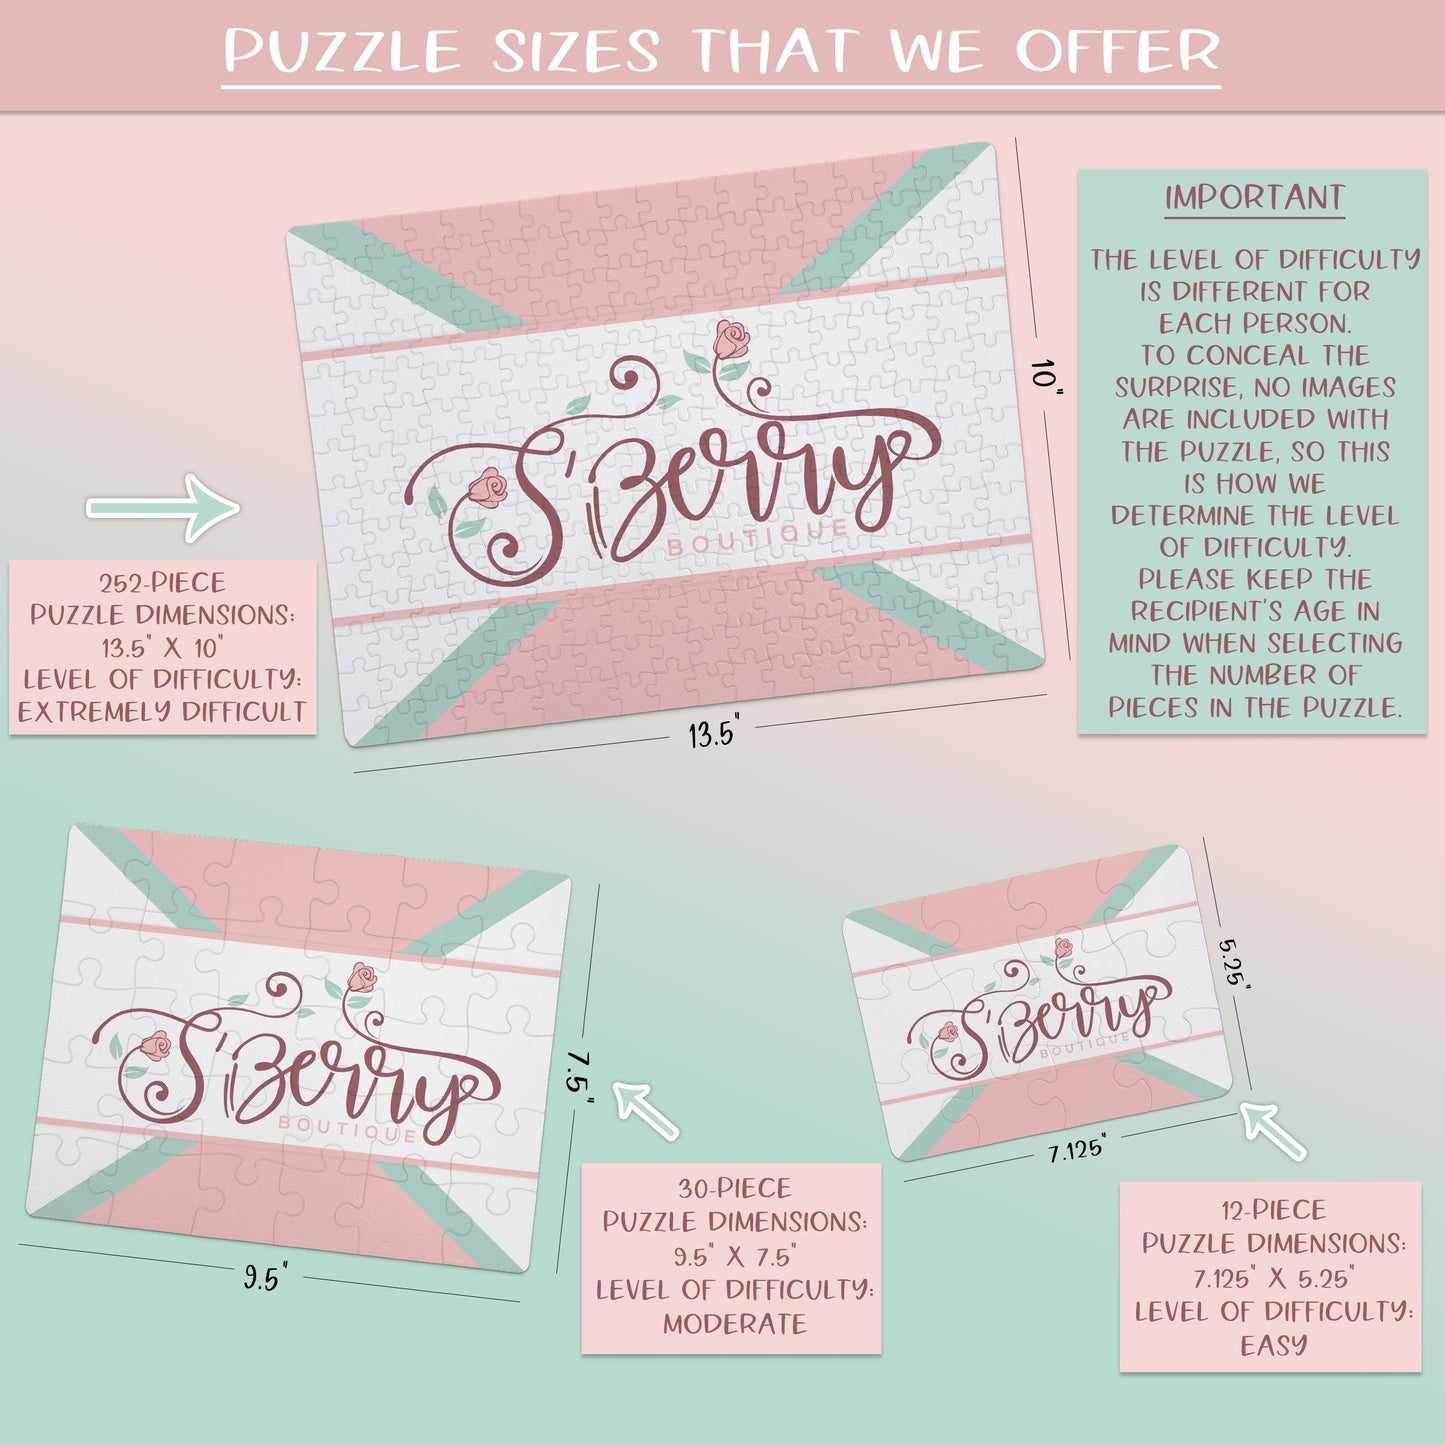 Create Your Own Puzzle - Arrow Design - CYOP0240 | S'Berry Boutique